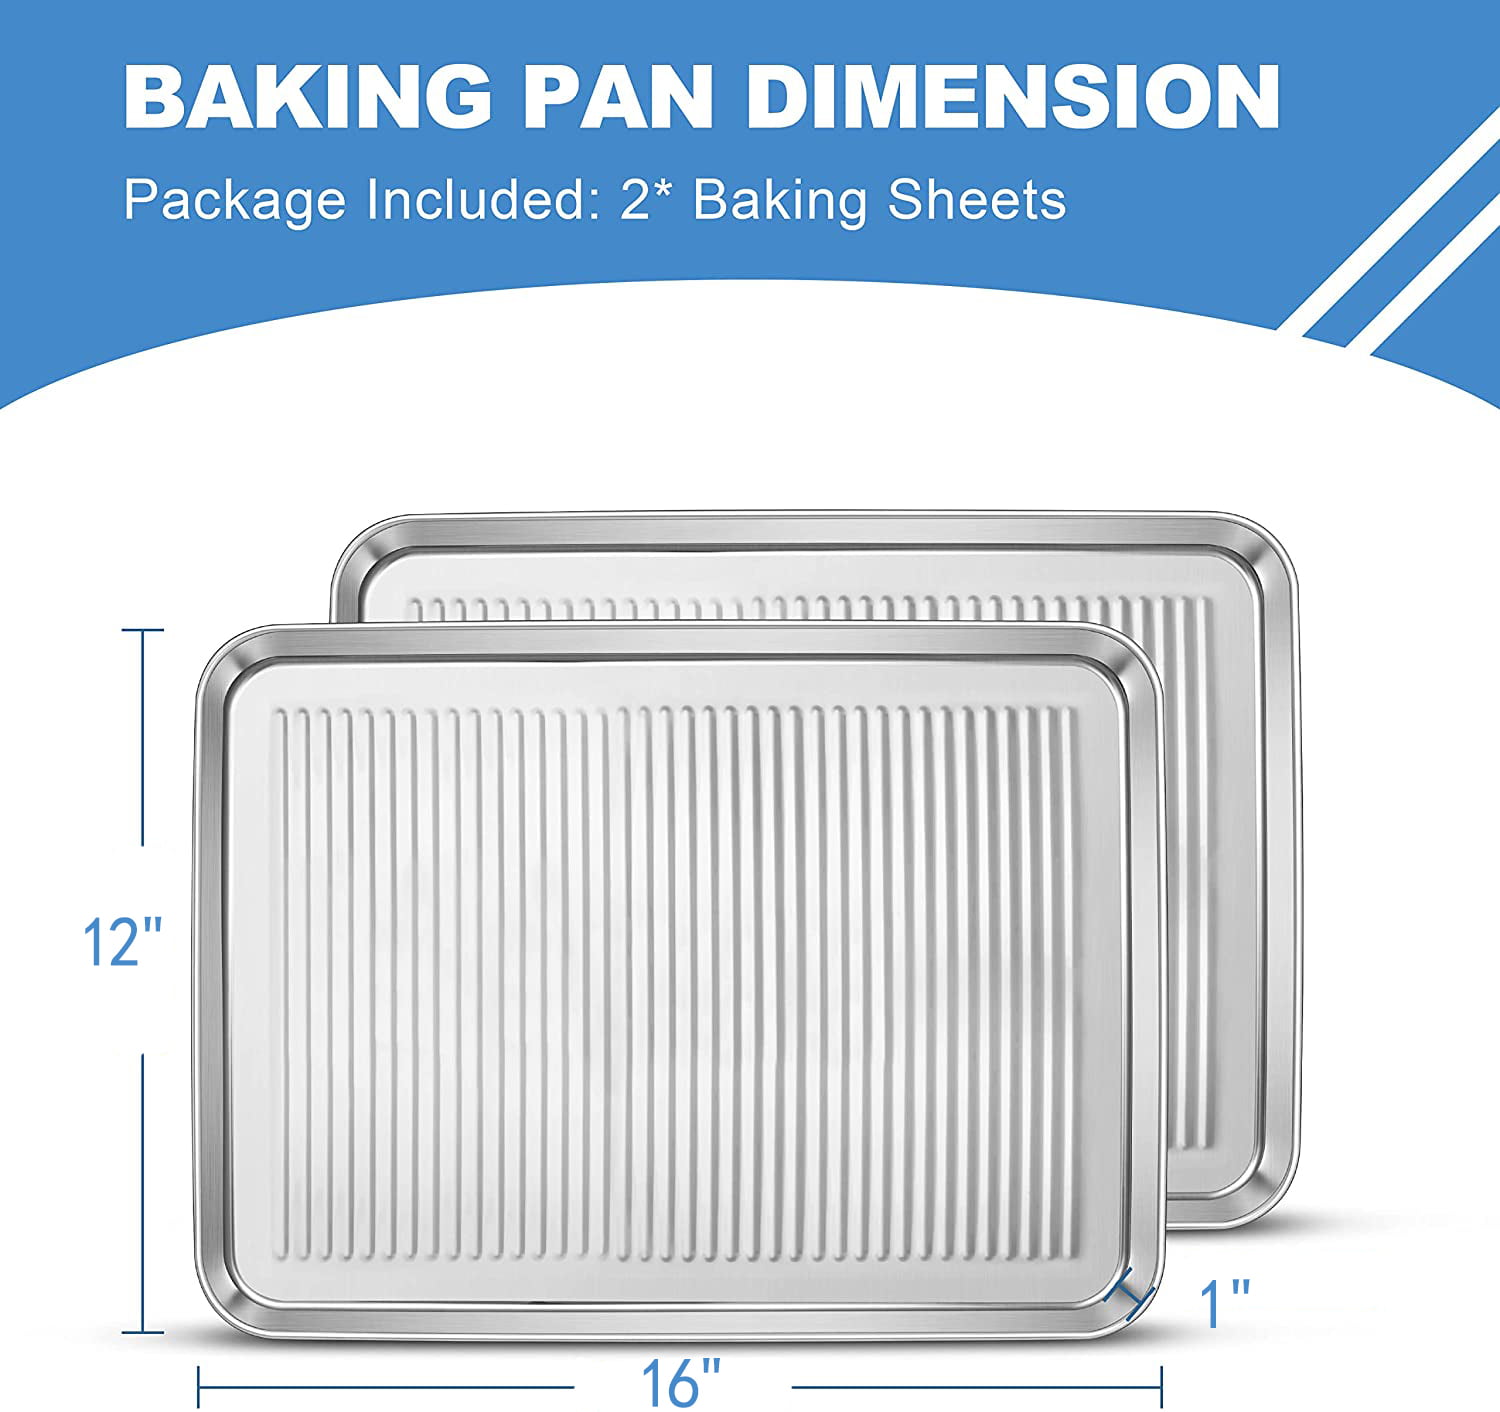 Wildone Baking Sheet Set of 2 - Stainless Steel Cookie Sheet Baking Pan, Size 16 x 12 x 1 inch, Non Toxic & Heavy Duty & Mirror Finish & Rust Free 